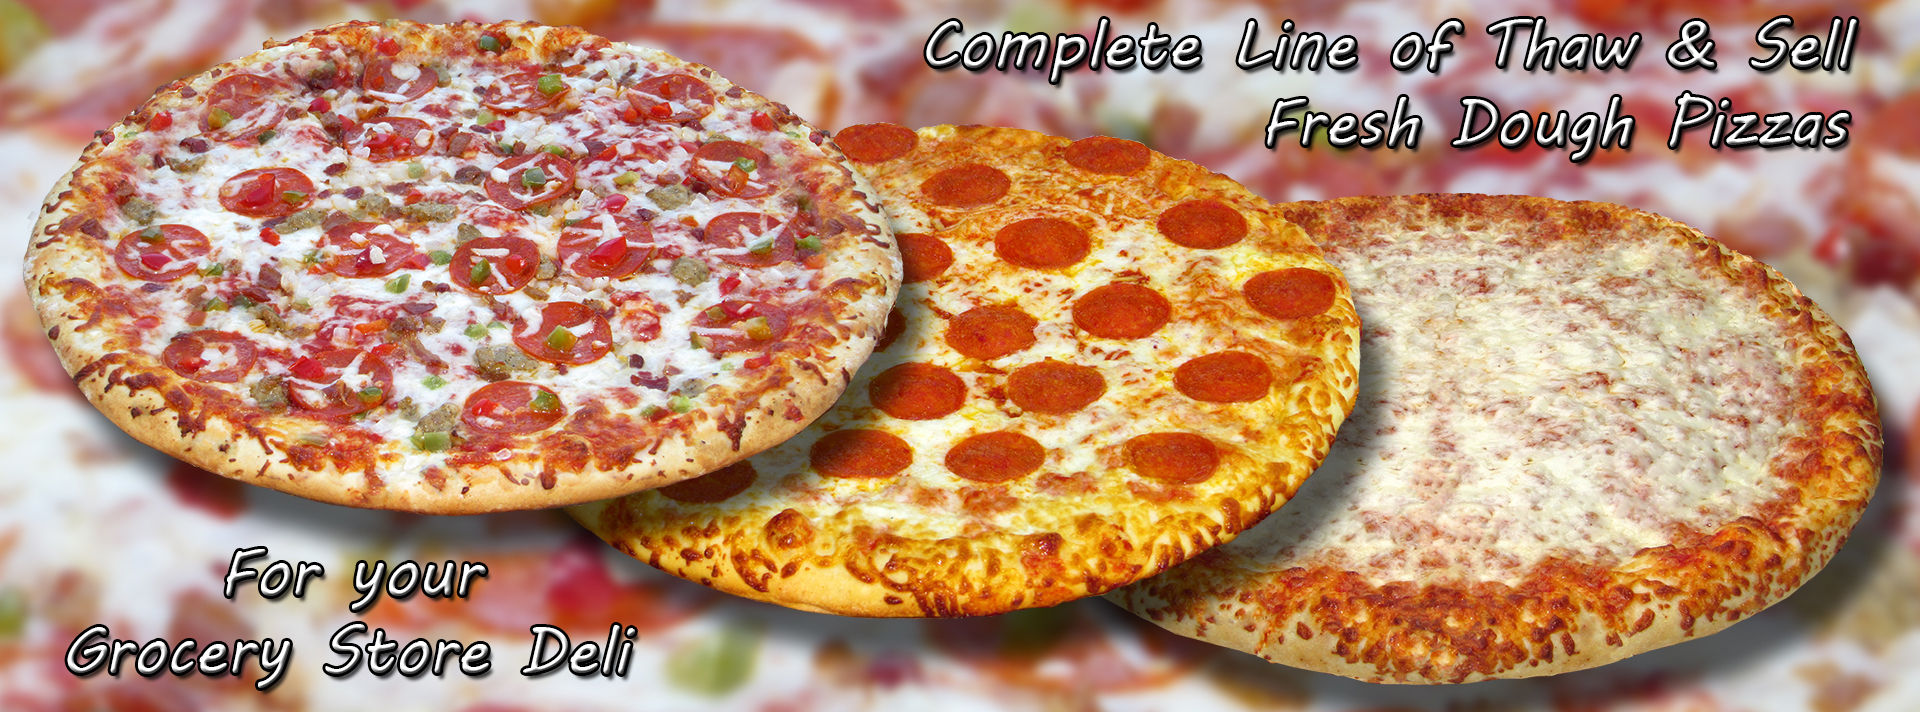 Complete line of thaw and sell fresh dough pizza for your grocery store deli.